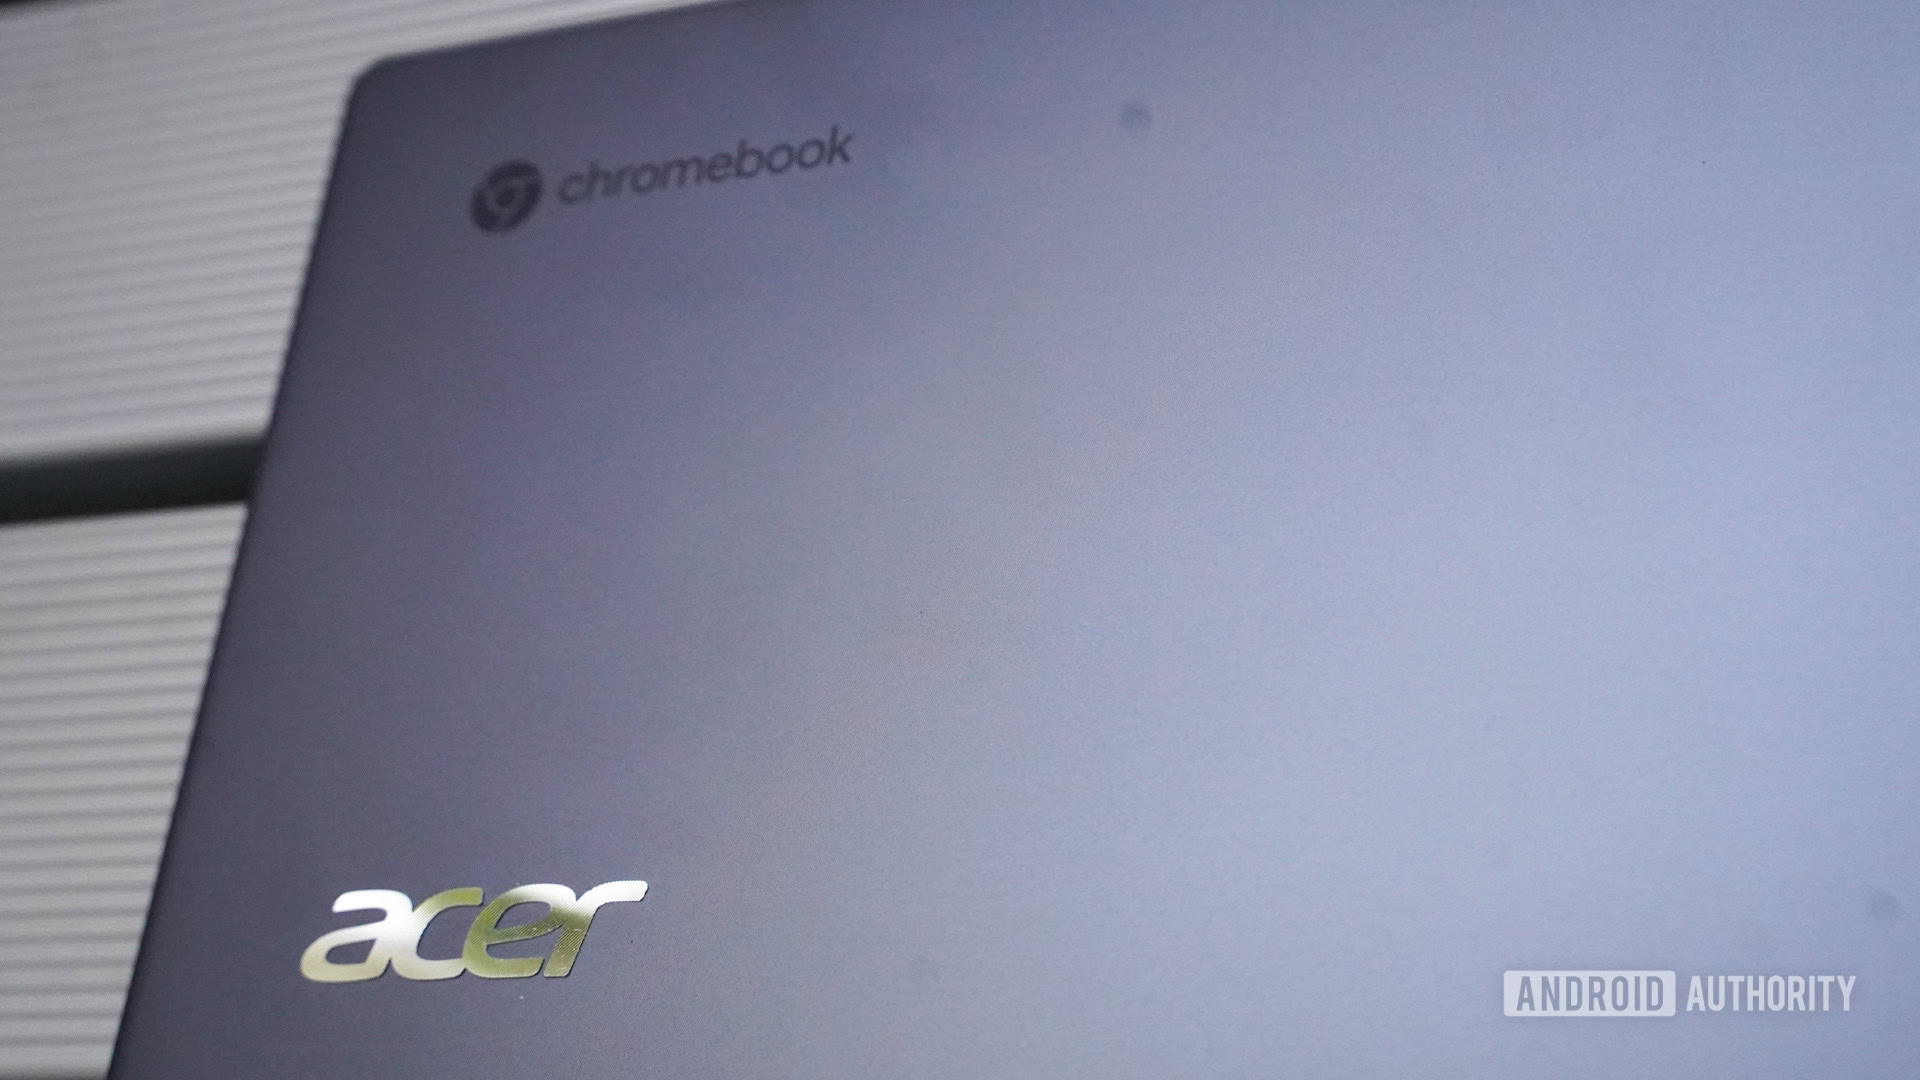 The Acer Chromebook Spin 713 case view showing Acer branding.